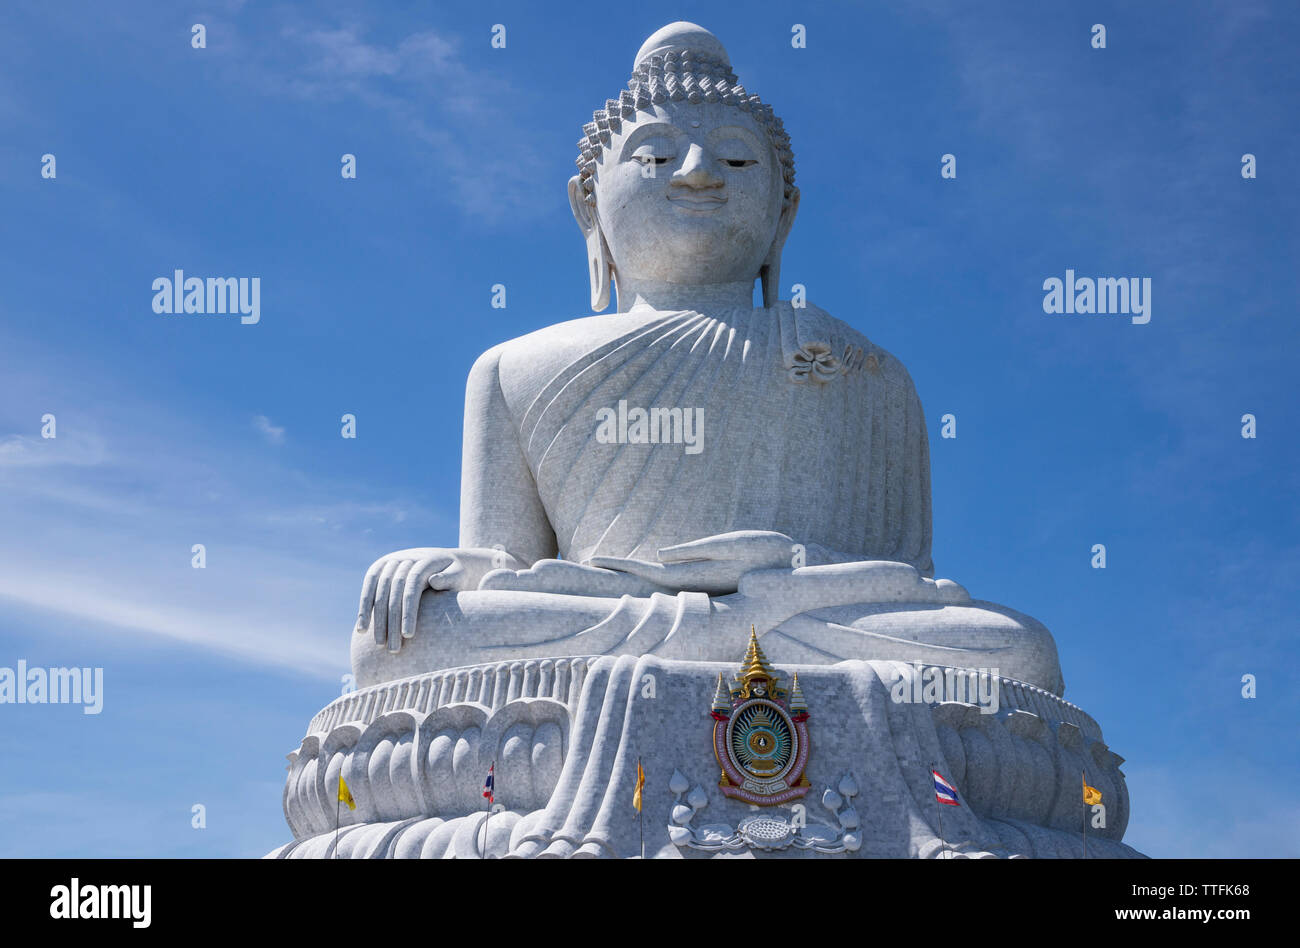 Low angle view of Buddha statue against blue sky during sunny day Stock Photo